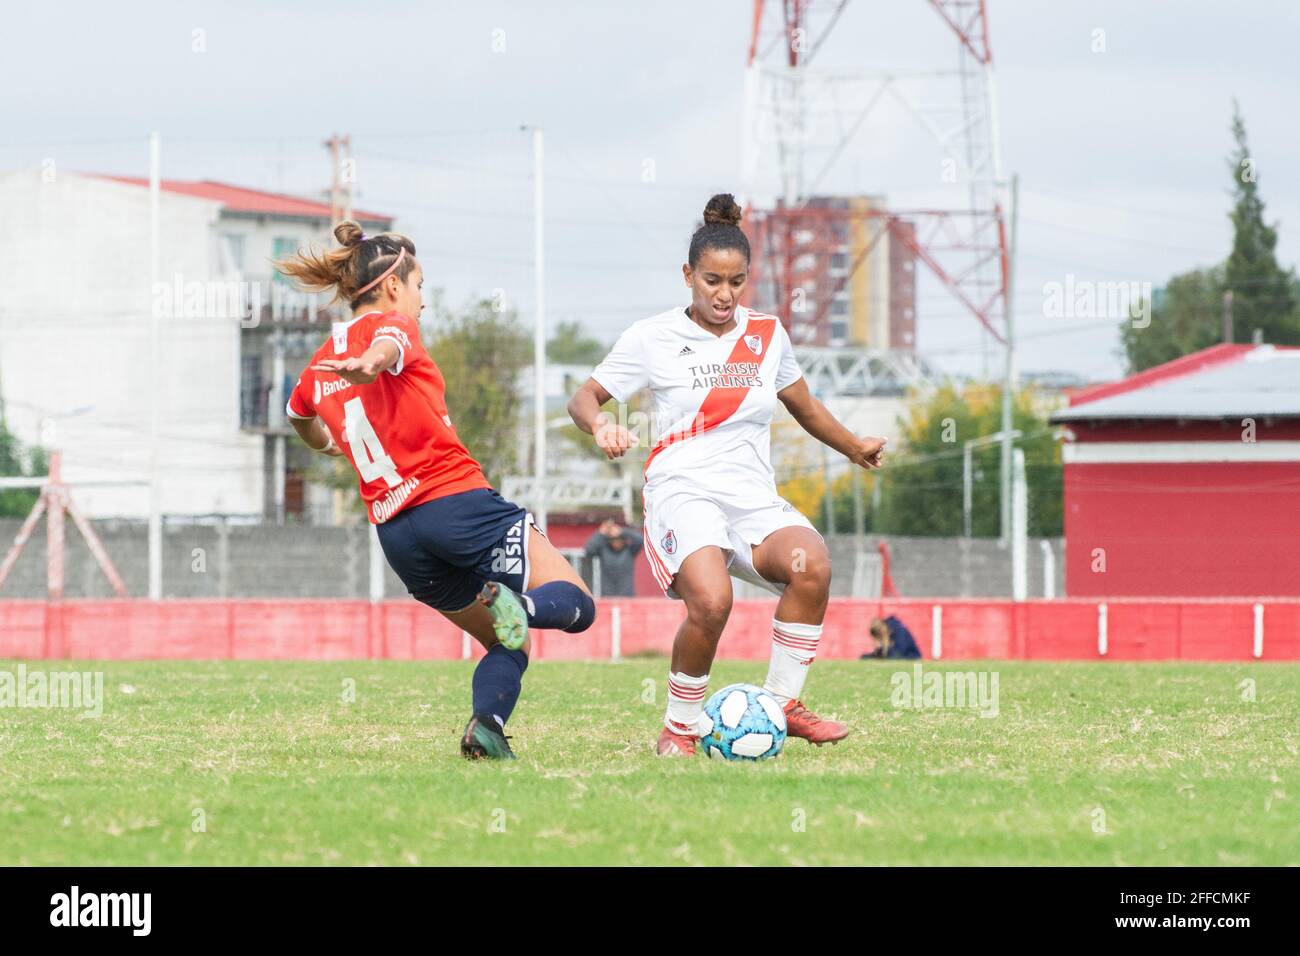 Buenos Aires, Argentina. 24th Apr, 2021. Laura Felipe (#23 River) during the game between Independiente and River Plate at Villa Dominico in Avellaneda, Buenos Aires, Argentina. Credit: SPP Sport Press Photo. /Alamy Live News Stock Photo